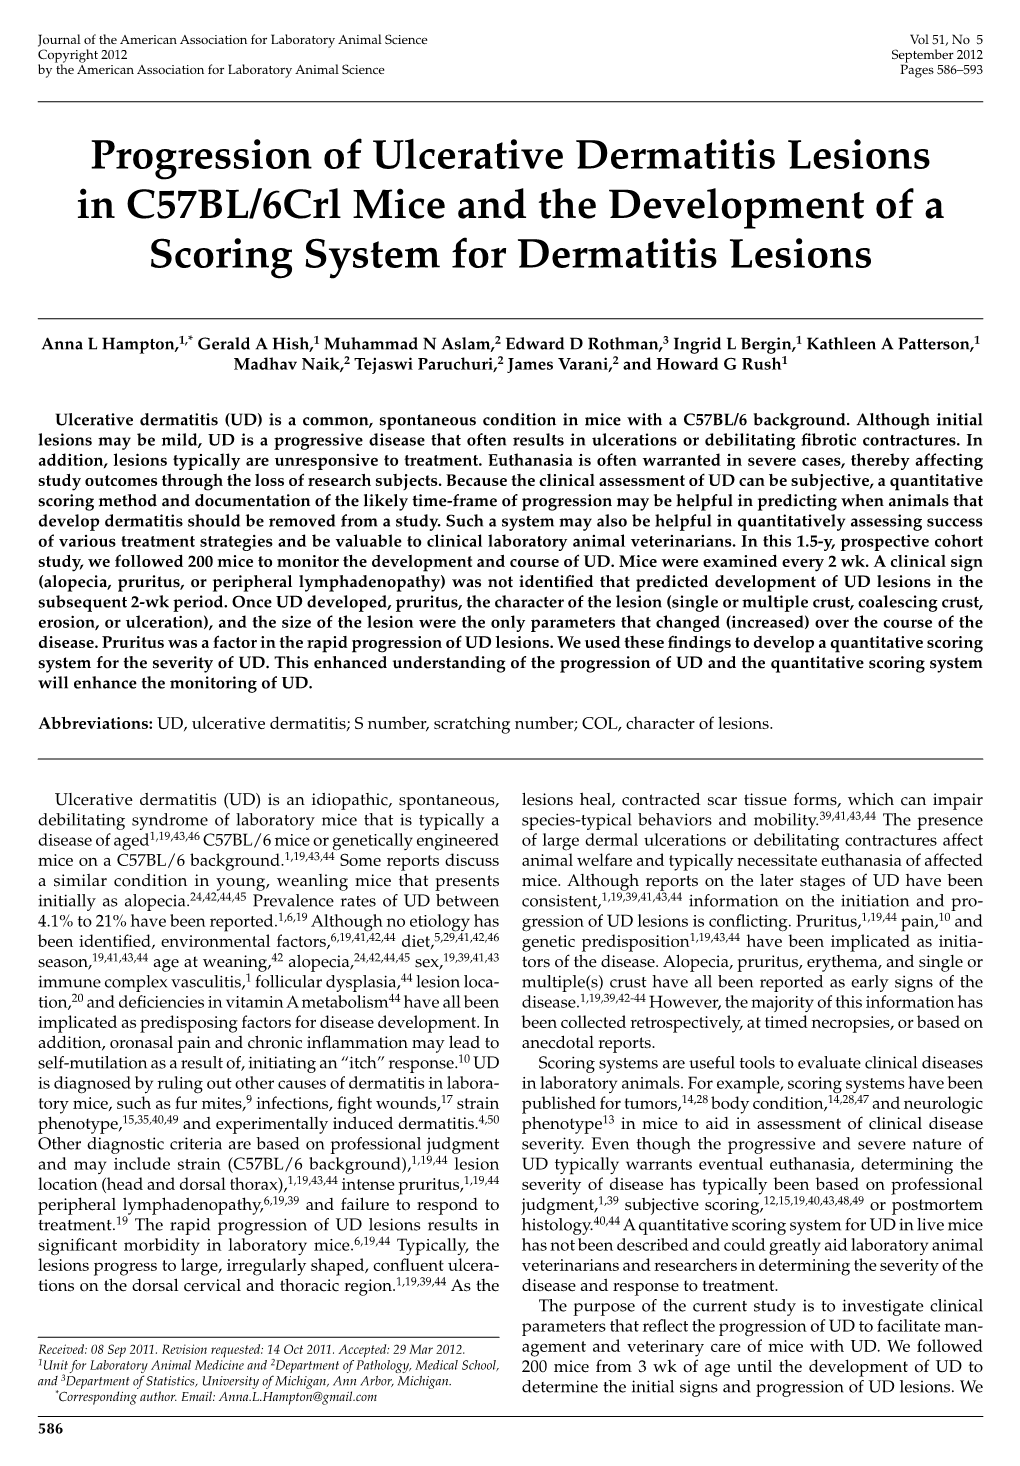 Progression of Ulcerative Dermatitis Lesions in C57BL/6Crl Mice and the Development of a Scoring System for Dermatitis Lesions